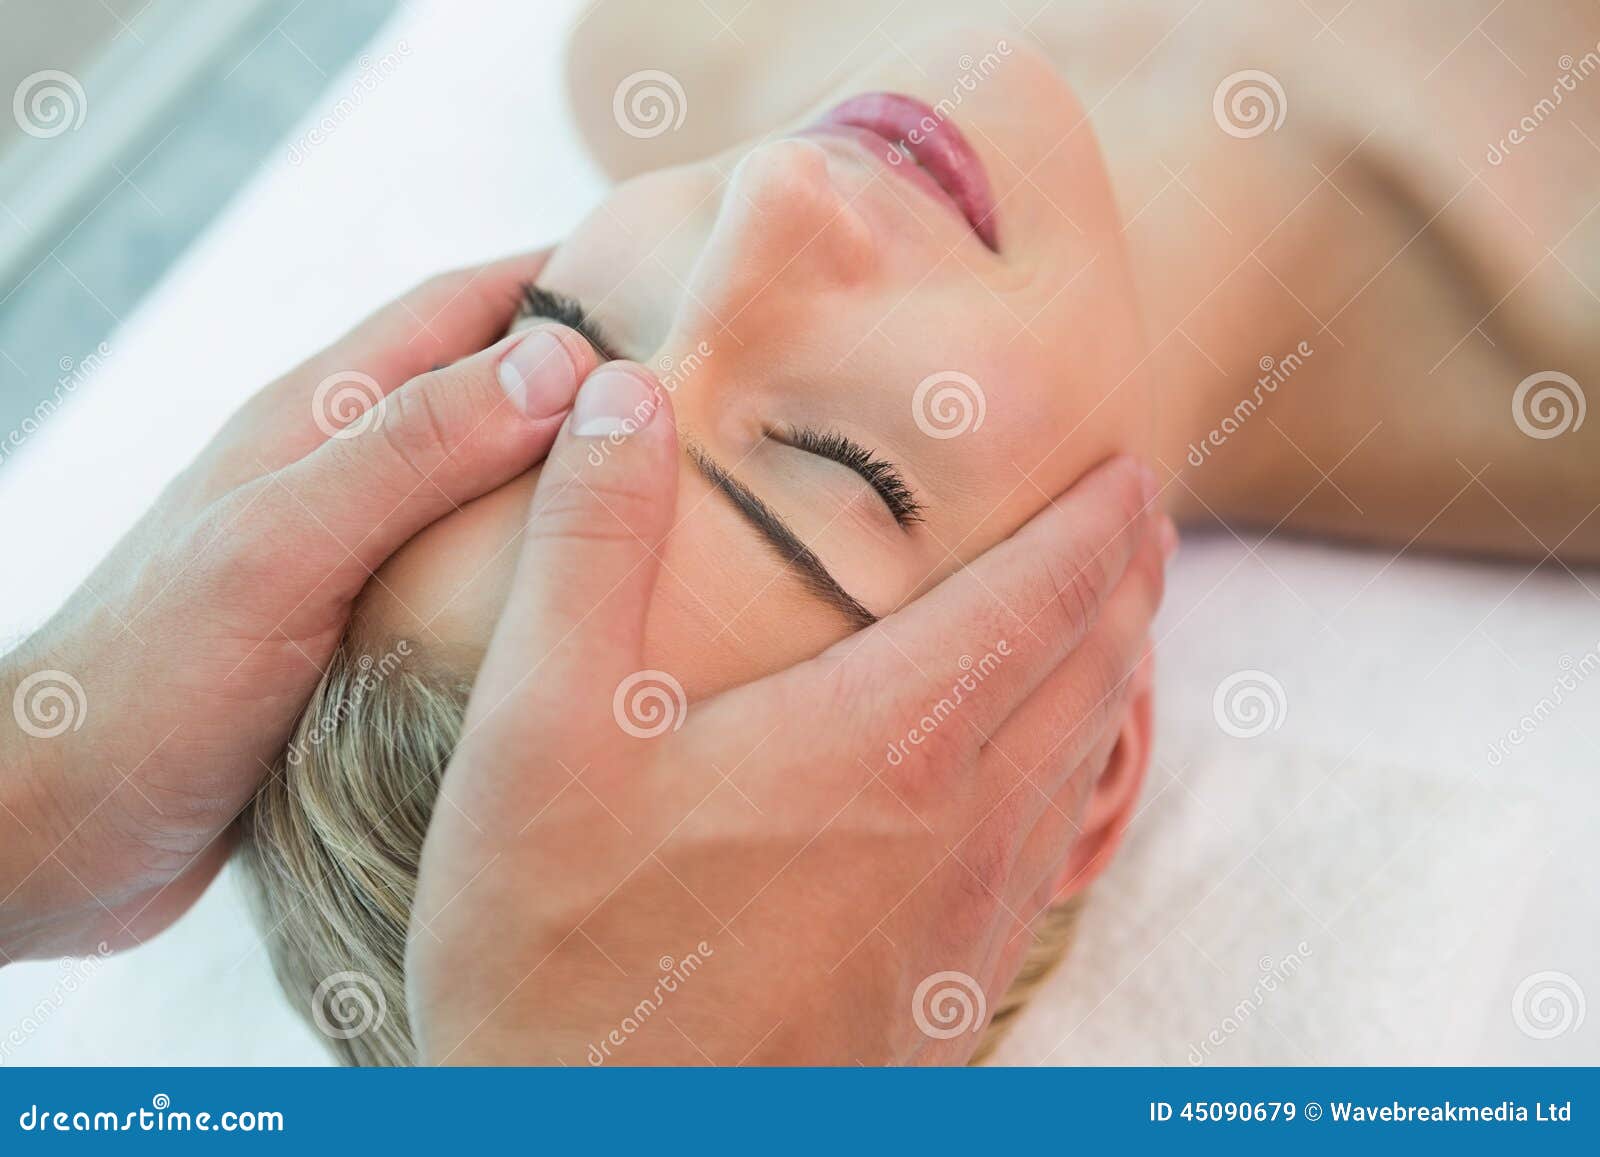 Attractive Woman Receiving Head Massage At Spa Center Stock Image Image Of Alternative Female